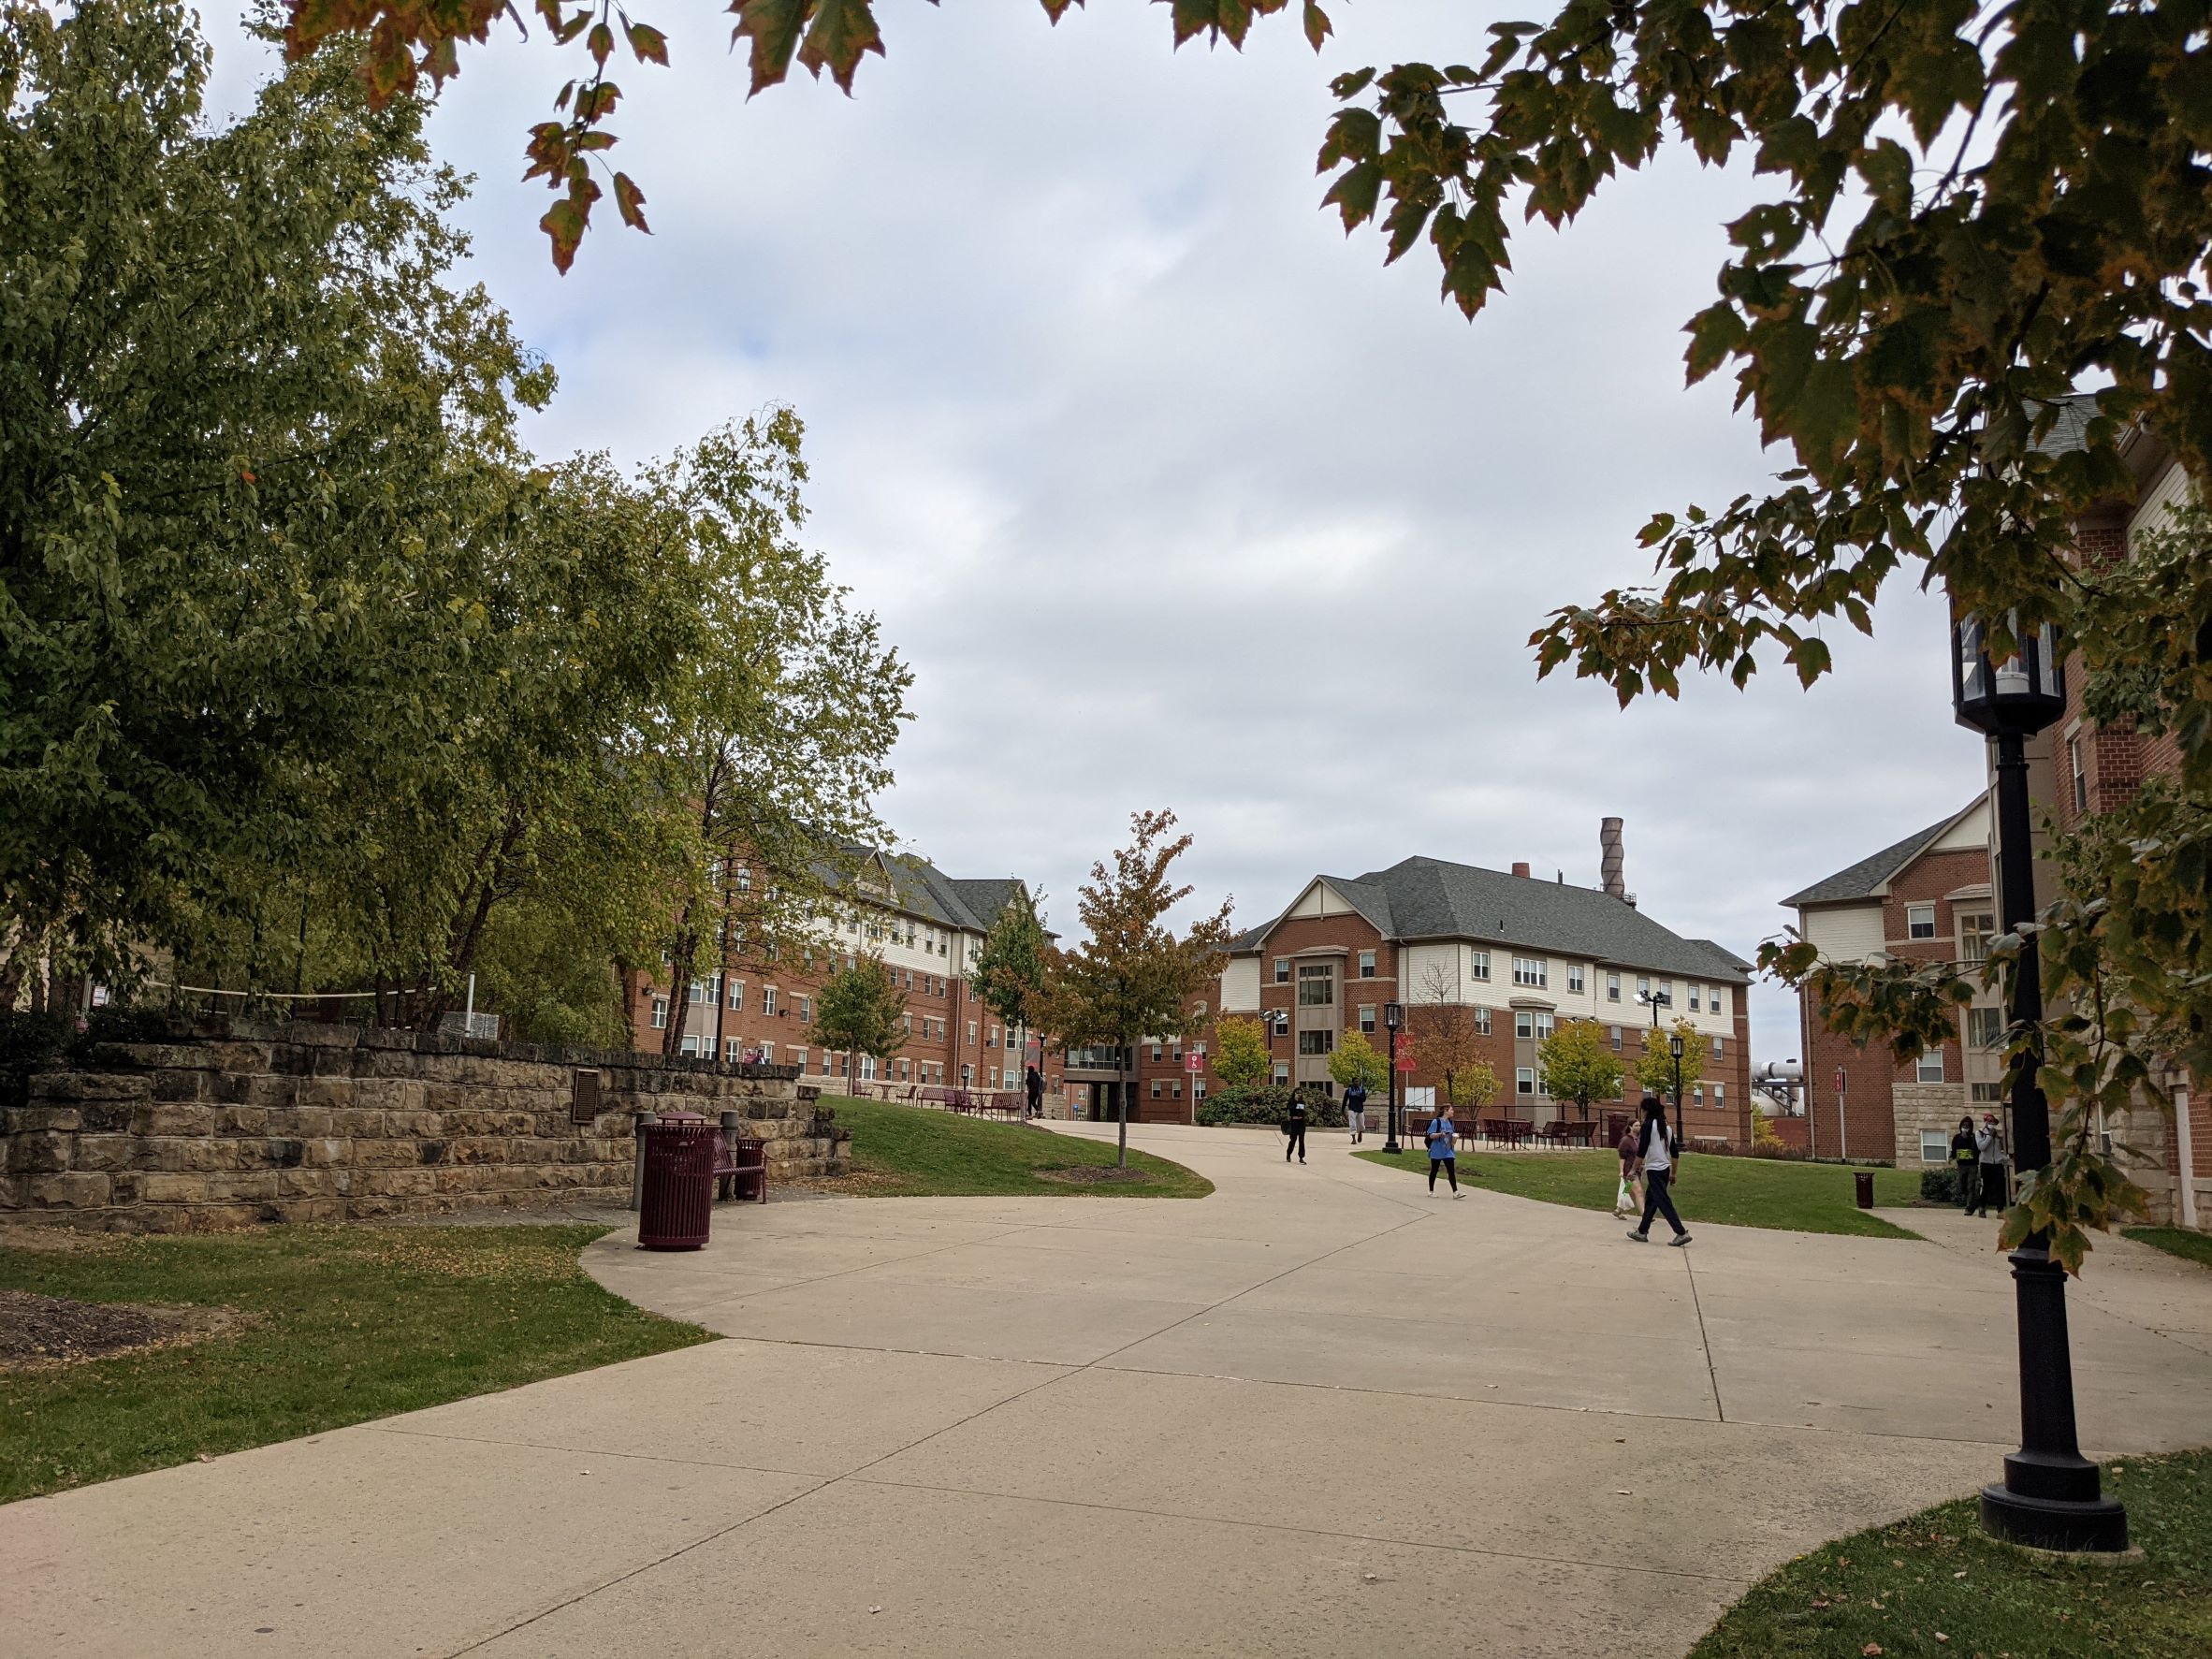 Large plaza area with students walking around with old stone retaining wall and plaque in foreground, traditional red brick living learning student housing community dormitory buildings in background